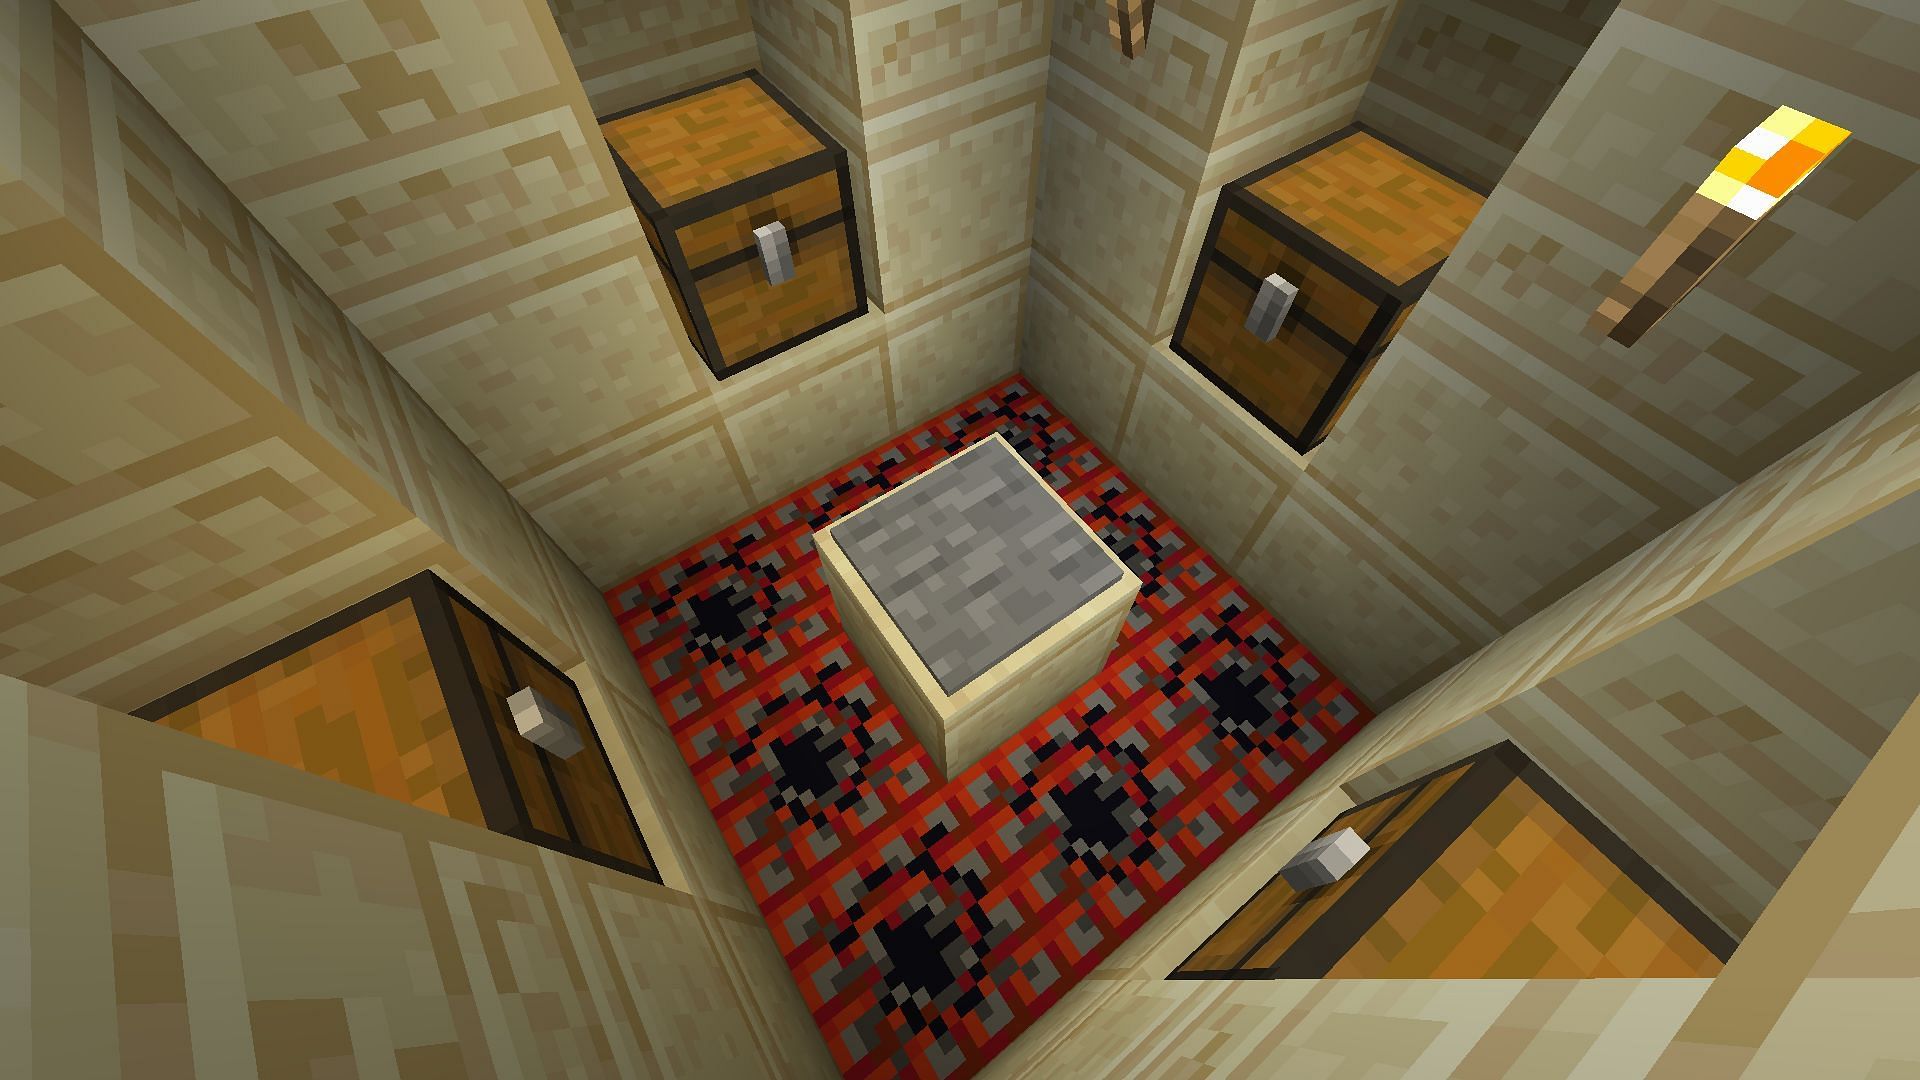 TNT trap in desert temple have taken the lives of many new players in Minecraft (Image via Mojang)